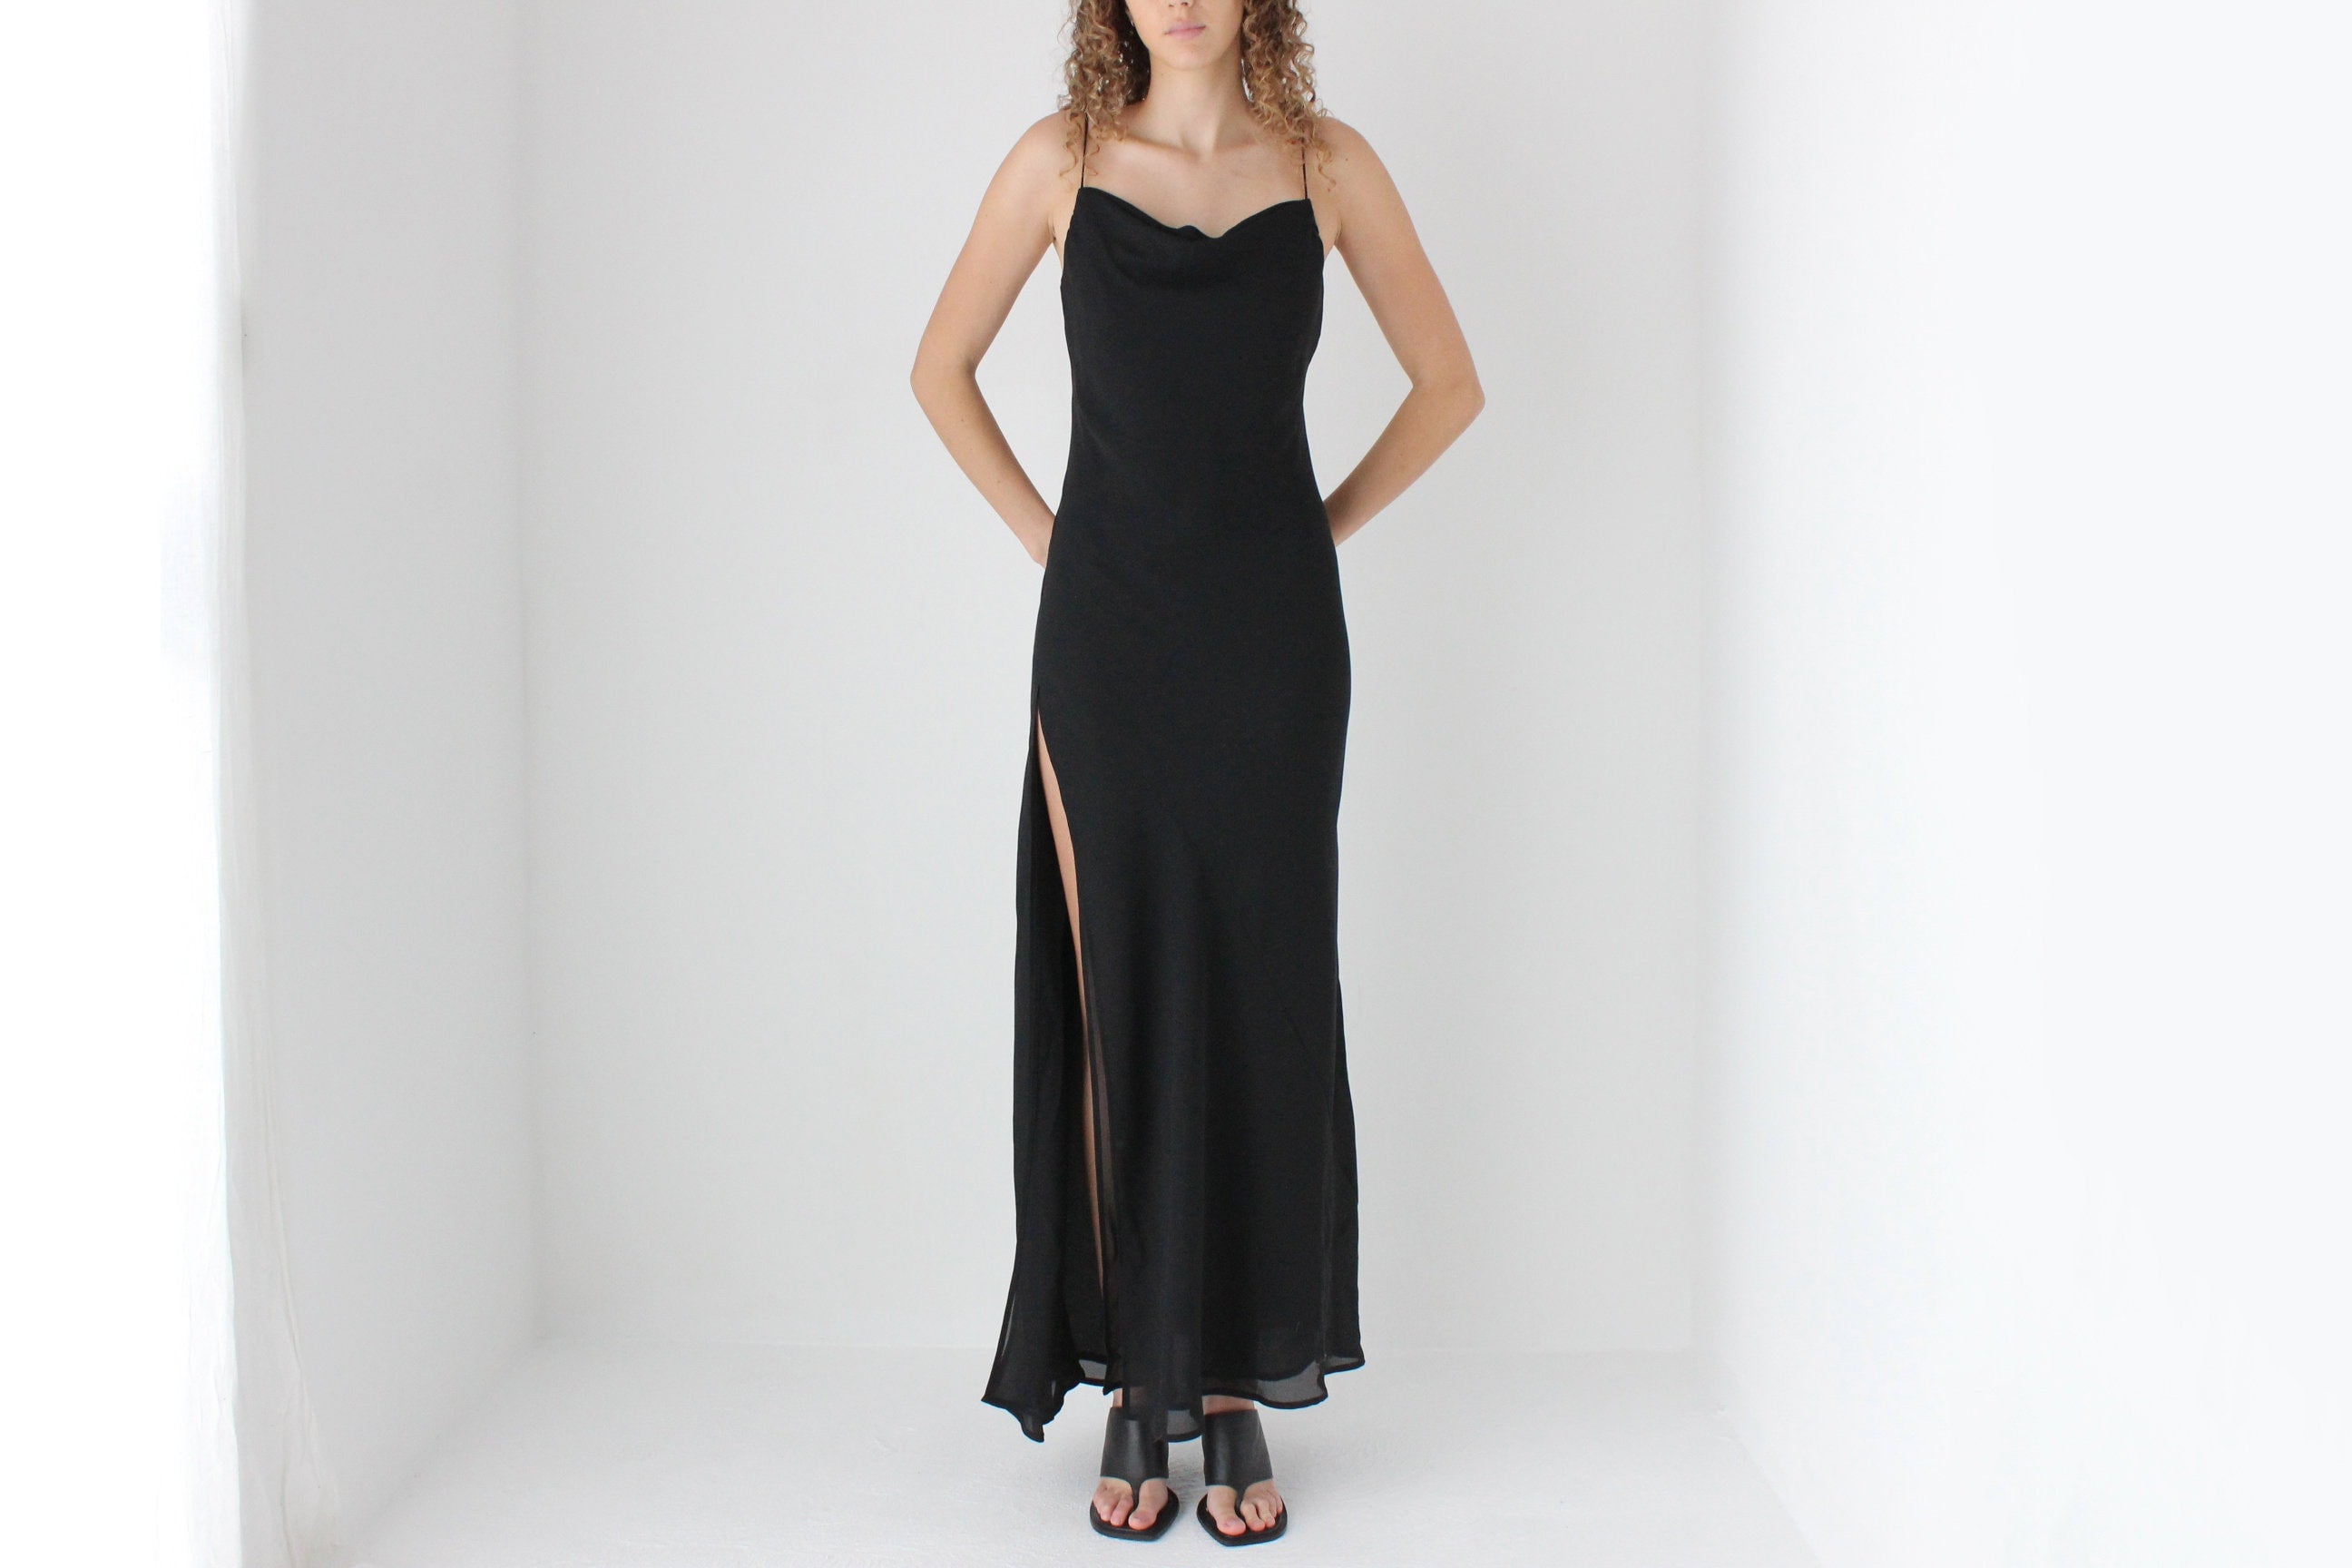 90s Femme Fatale Spaghetti Strap Cocktail Gown